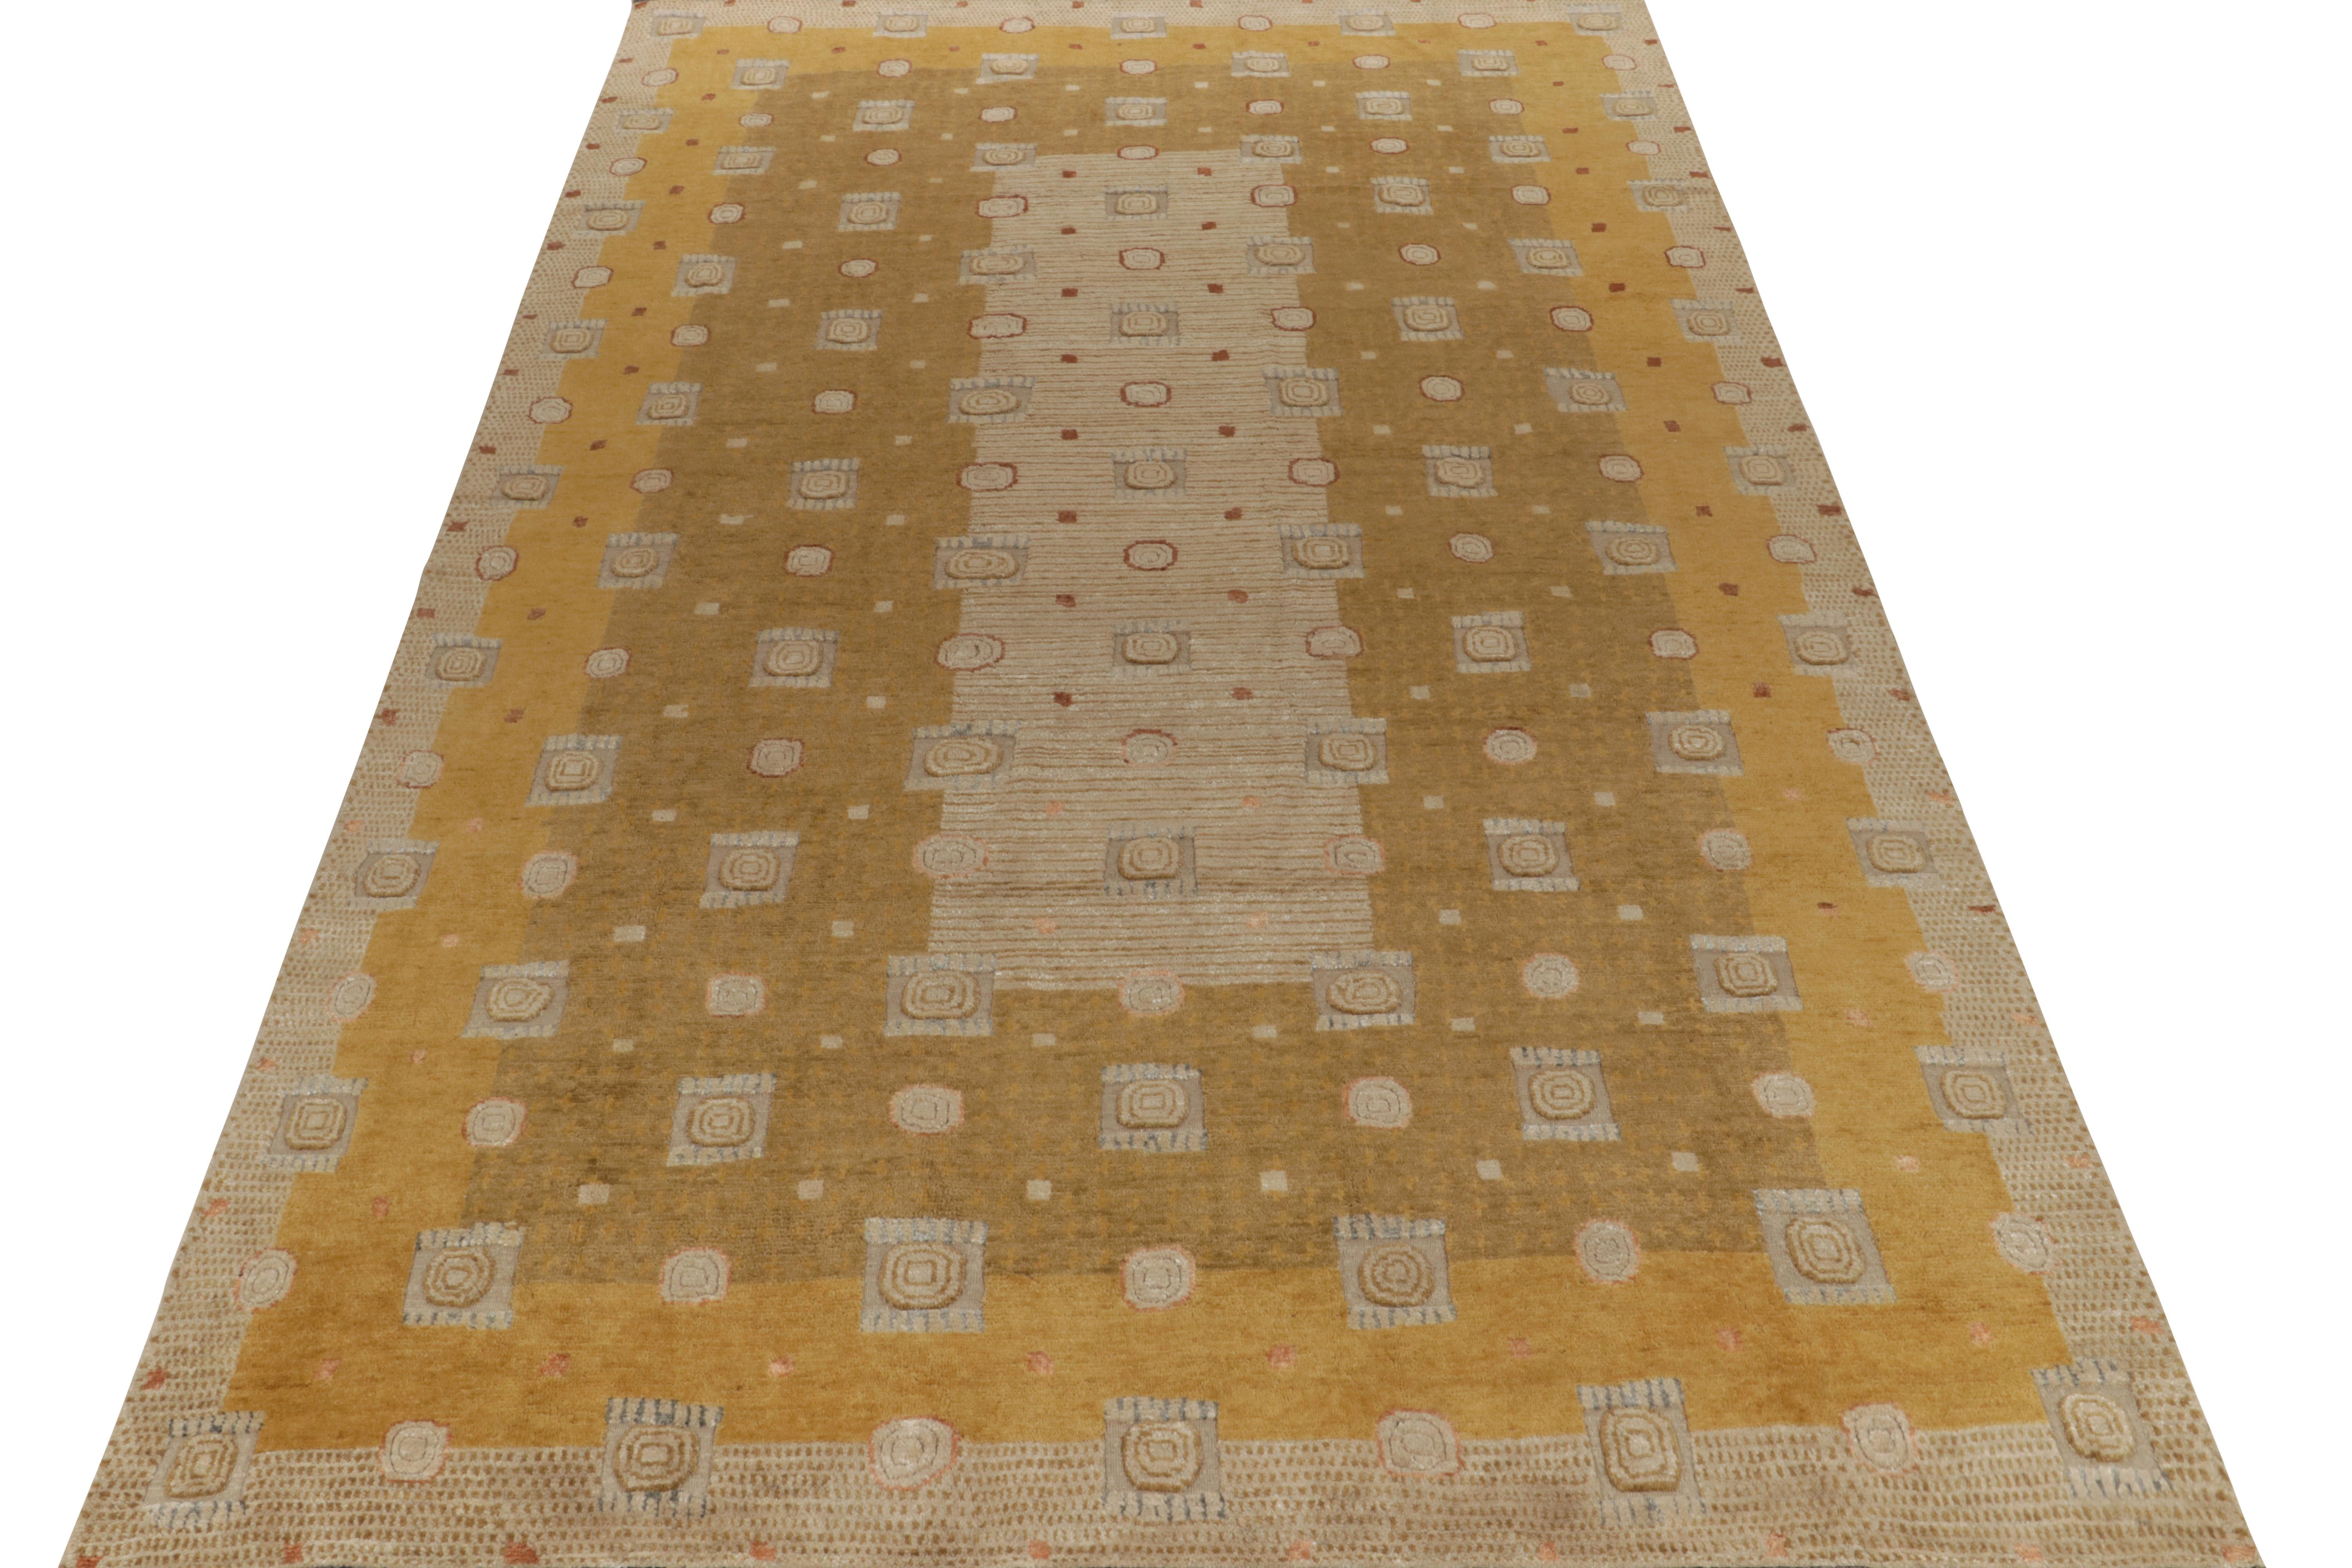 A 10x17 ode to celebrated Art Deco rug styles, from Rug & Kilim’s Deco Collection. Hand knotted in wool, marrying dynamic high-low pile textures with geometric patterns in gold and beige-brown hues. Crisp white accents bring out the graphic,